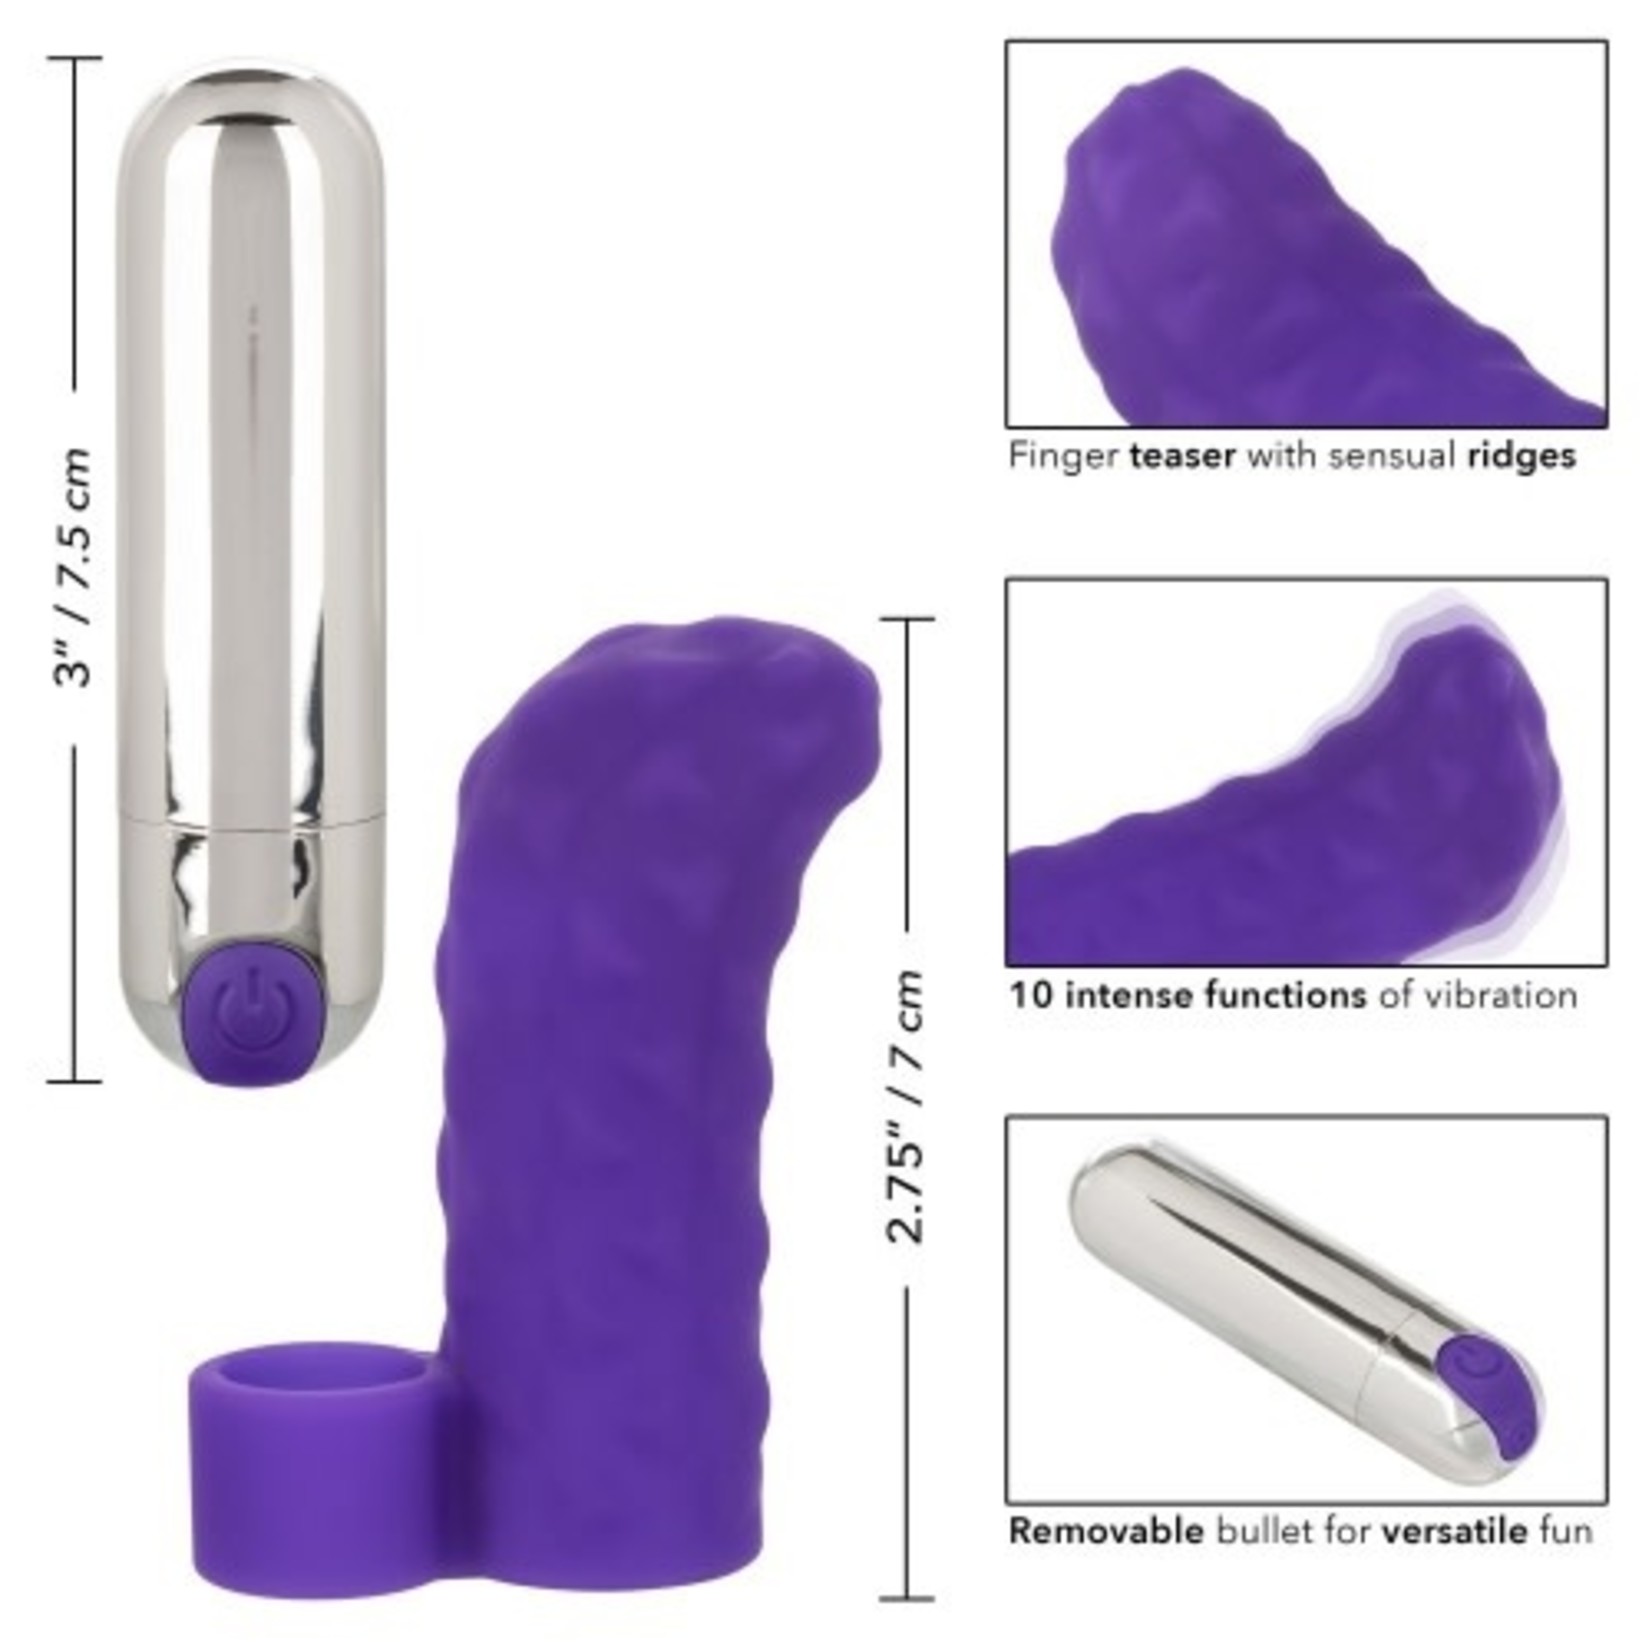 CALEXOTICS INTIMATE PLAY - RECHARGEABLE FINGER TEASER - PURPLE